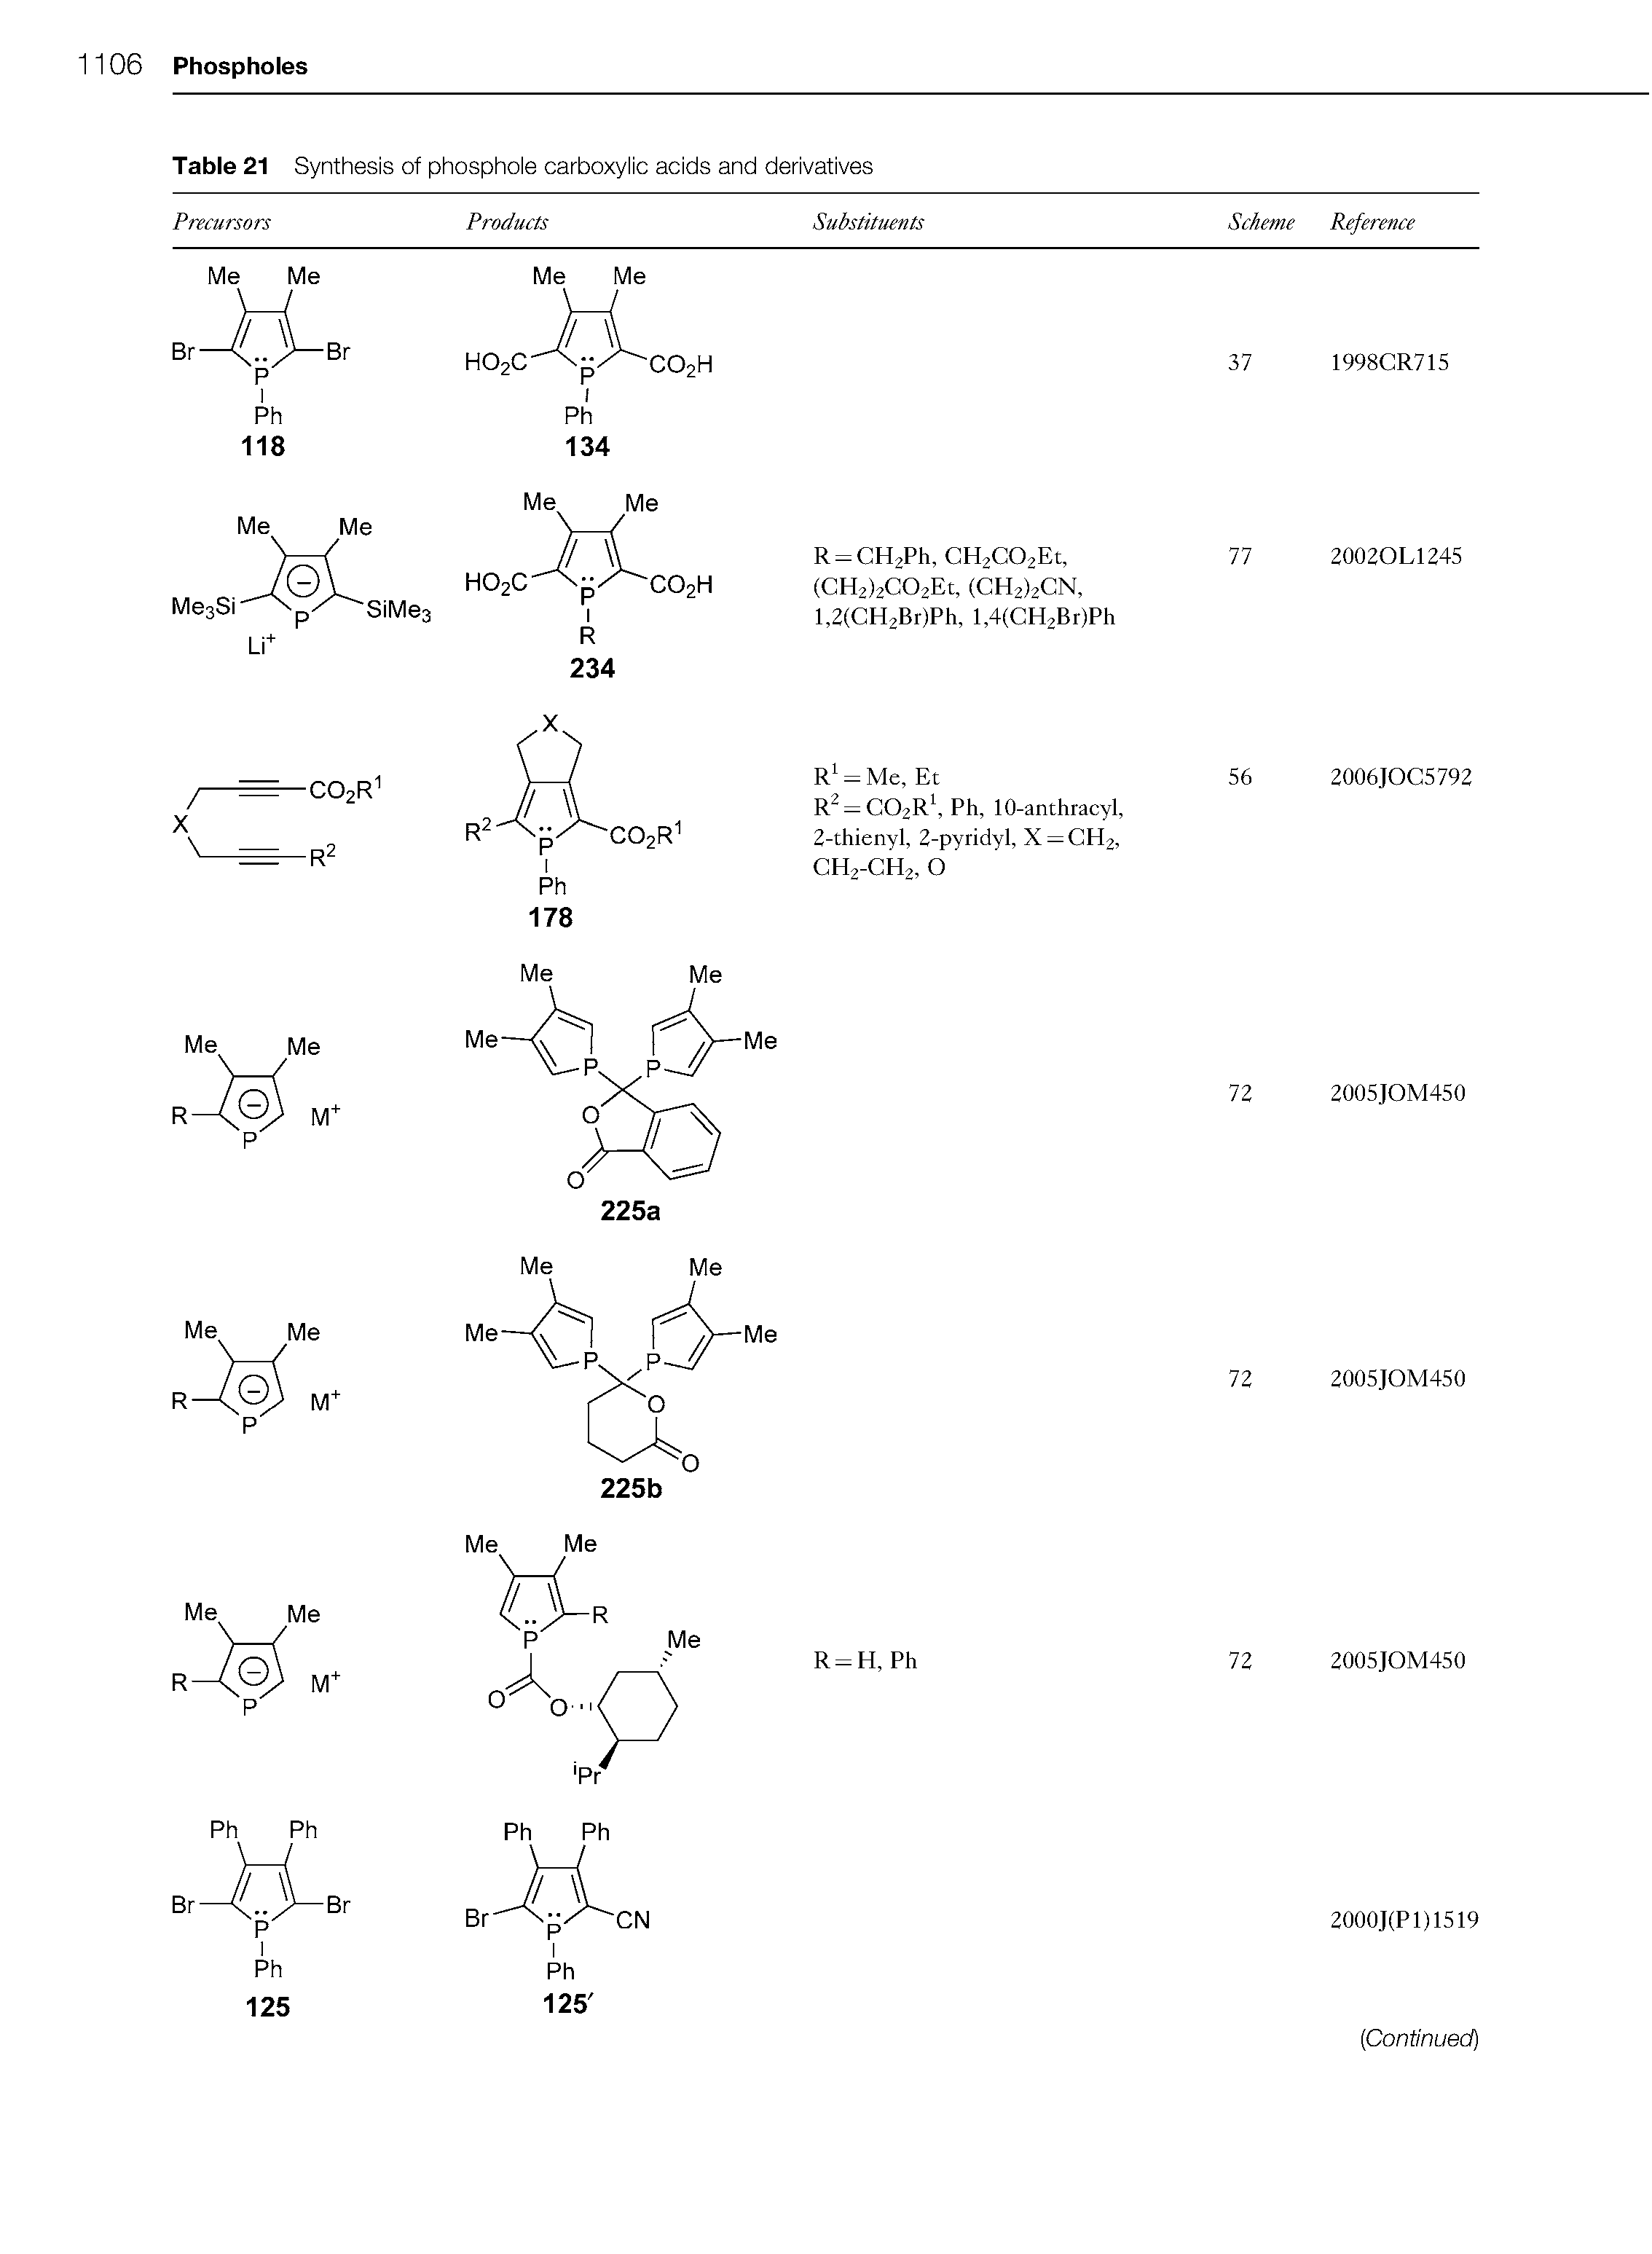 Table 21 Synthesis of phosphole carboxylic acids and derivatives...